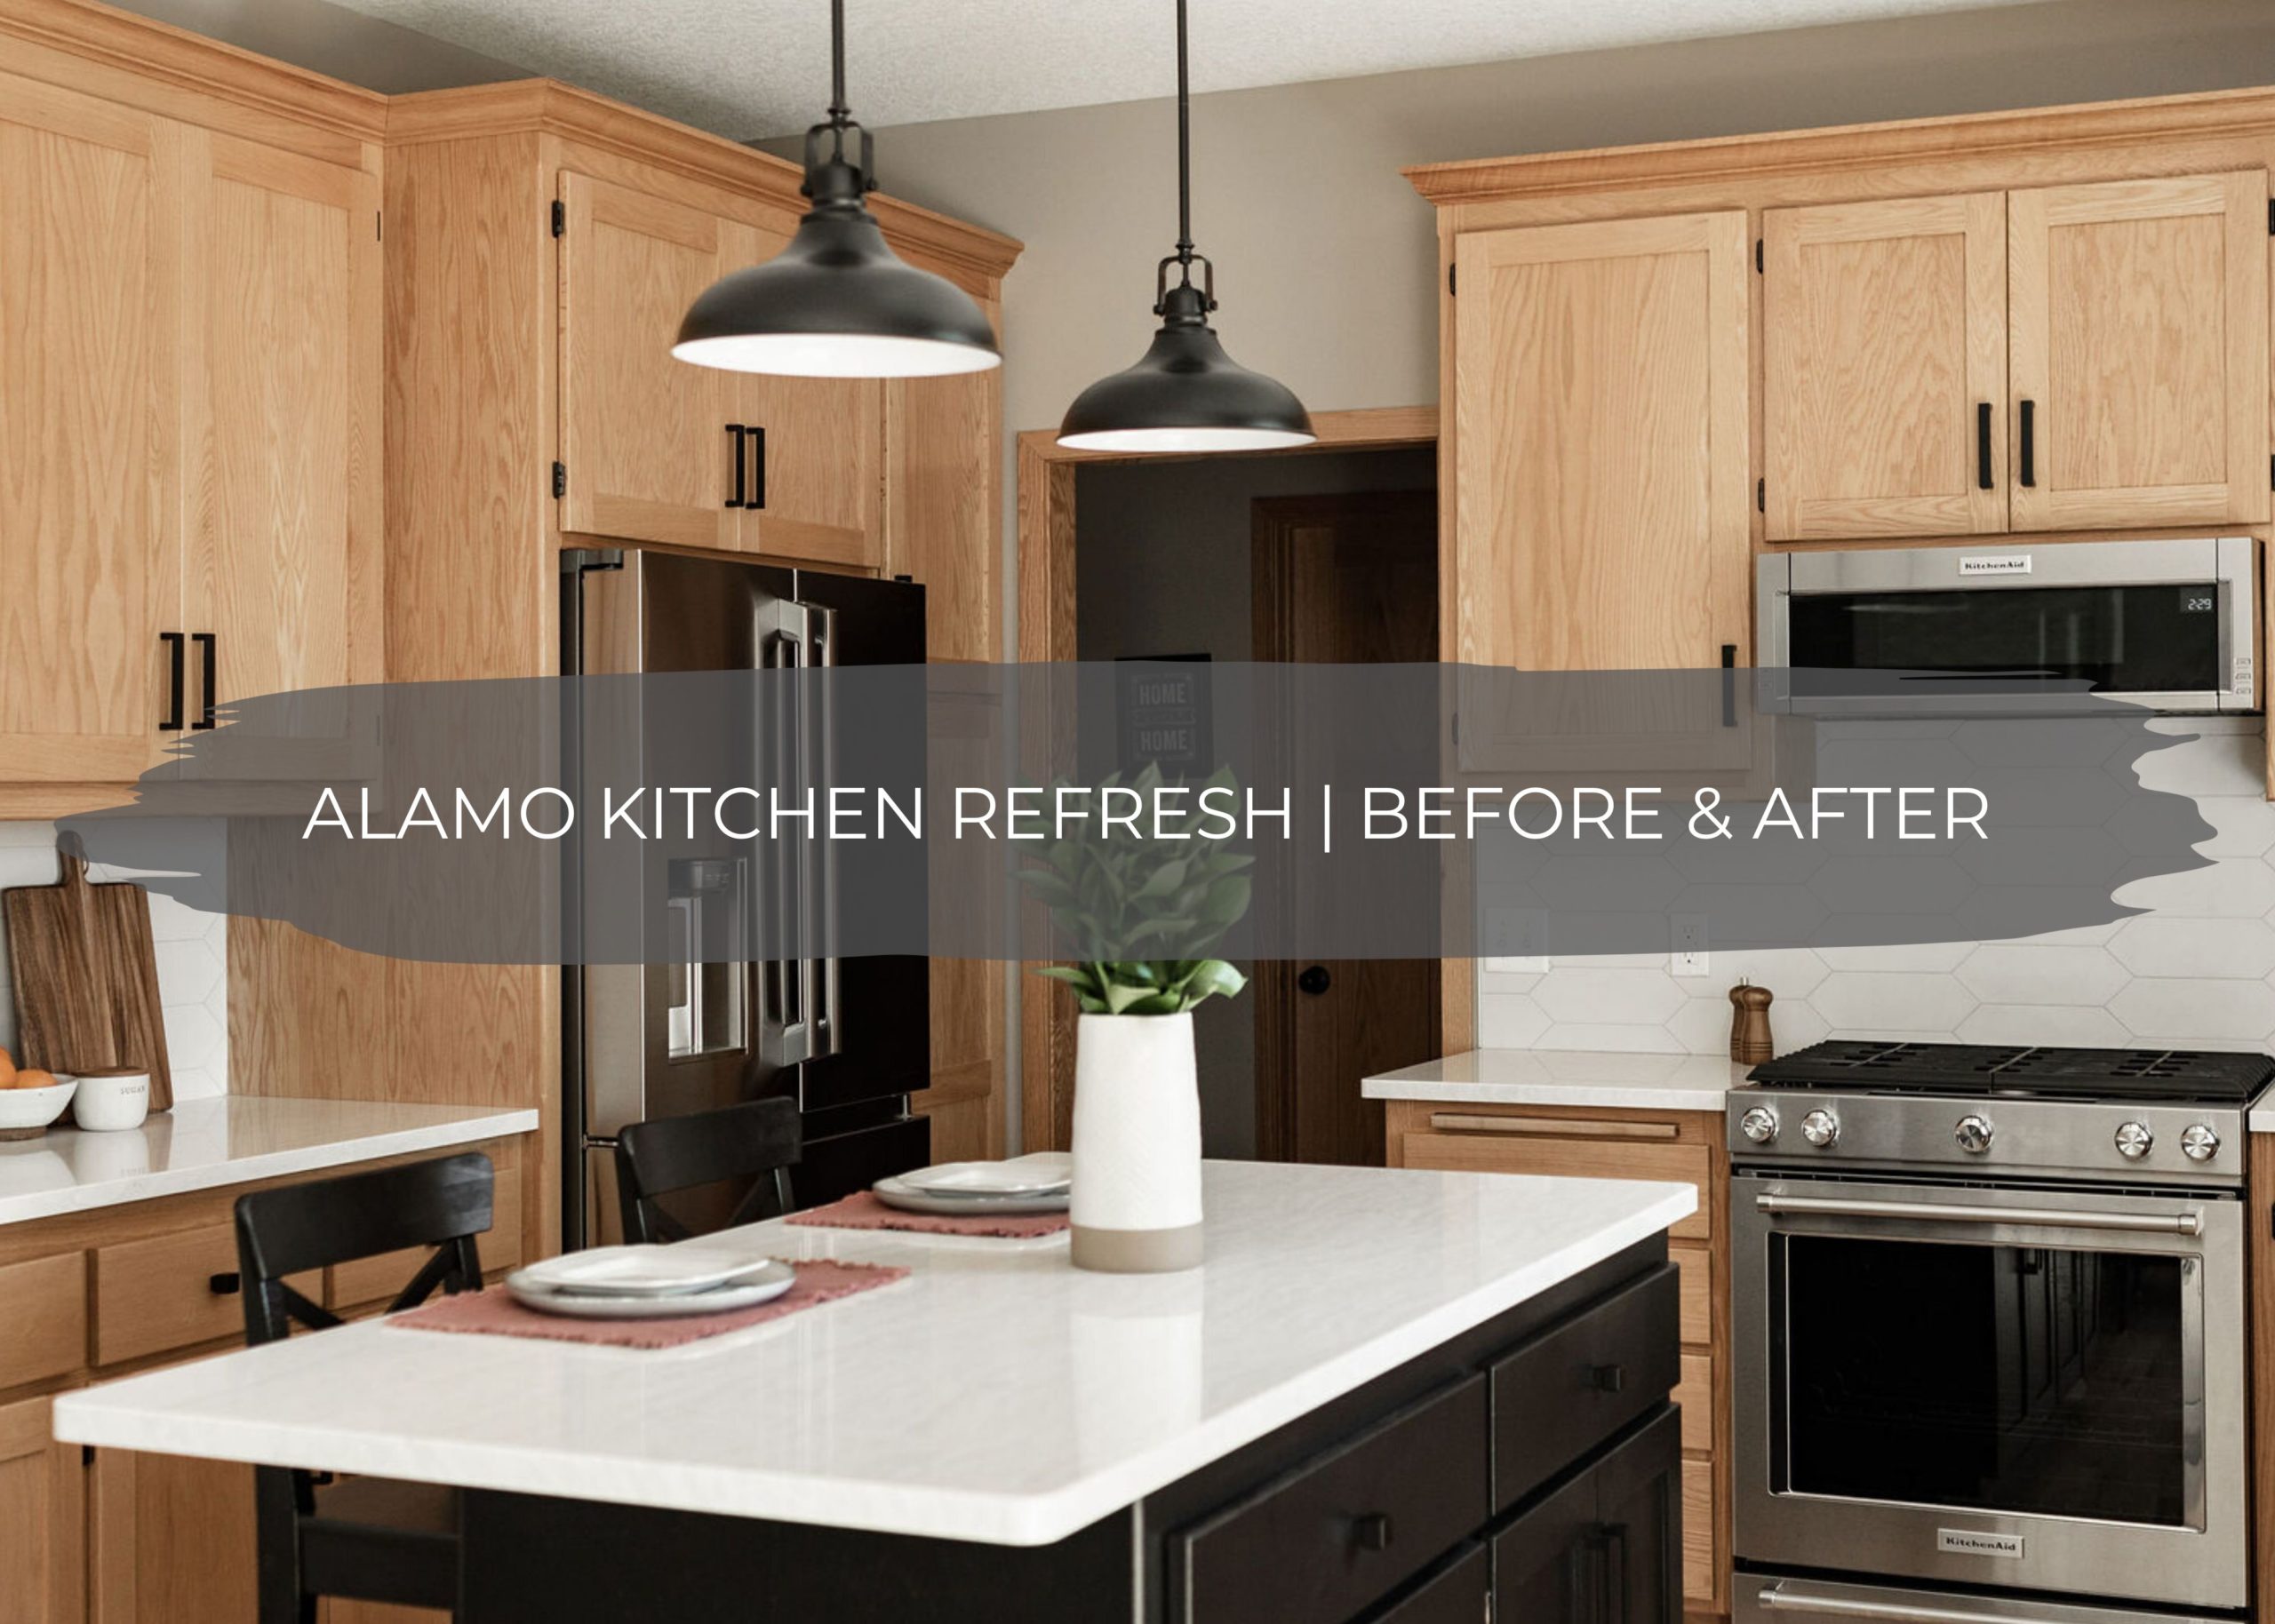 Alamo Kitchen Refresh | Before & After